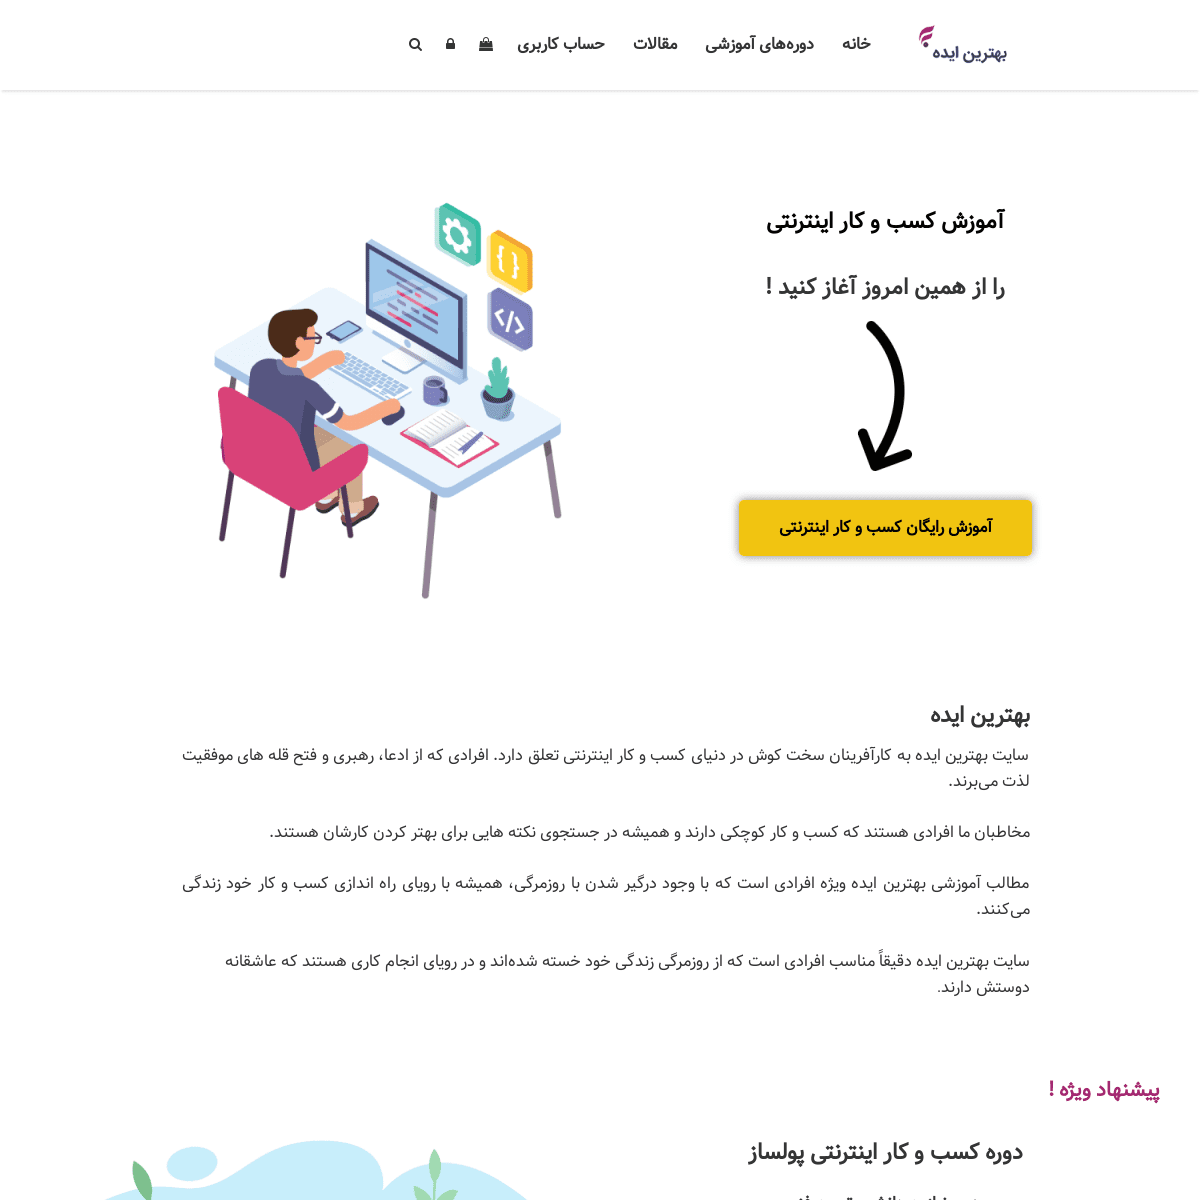 A complete backup of behtarinideh.com